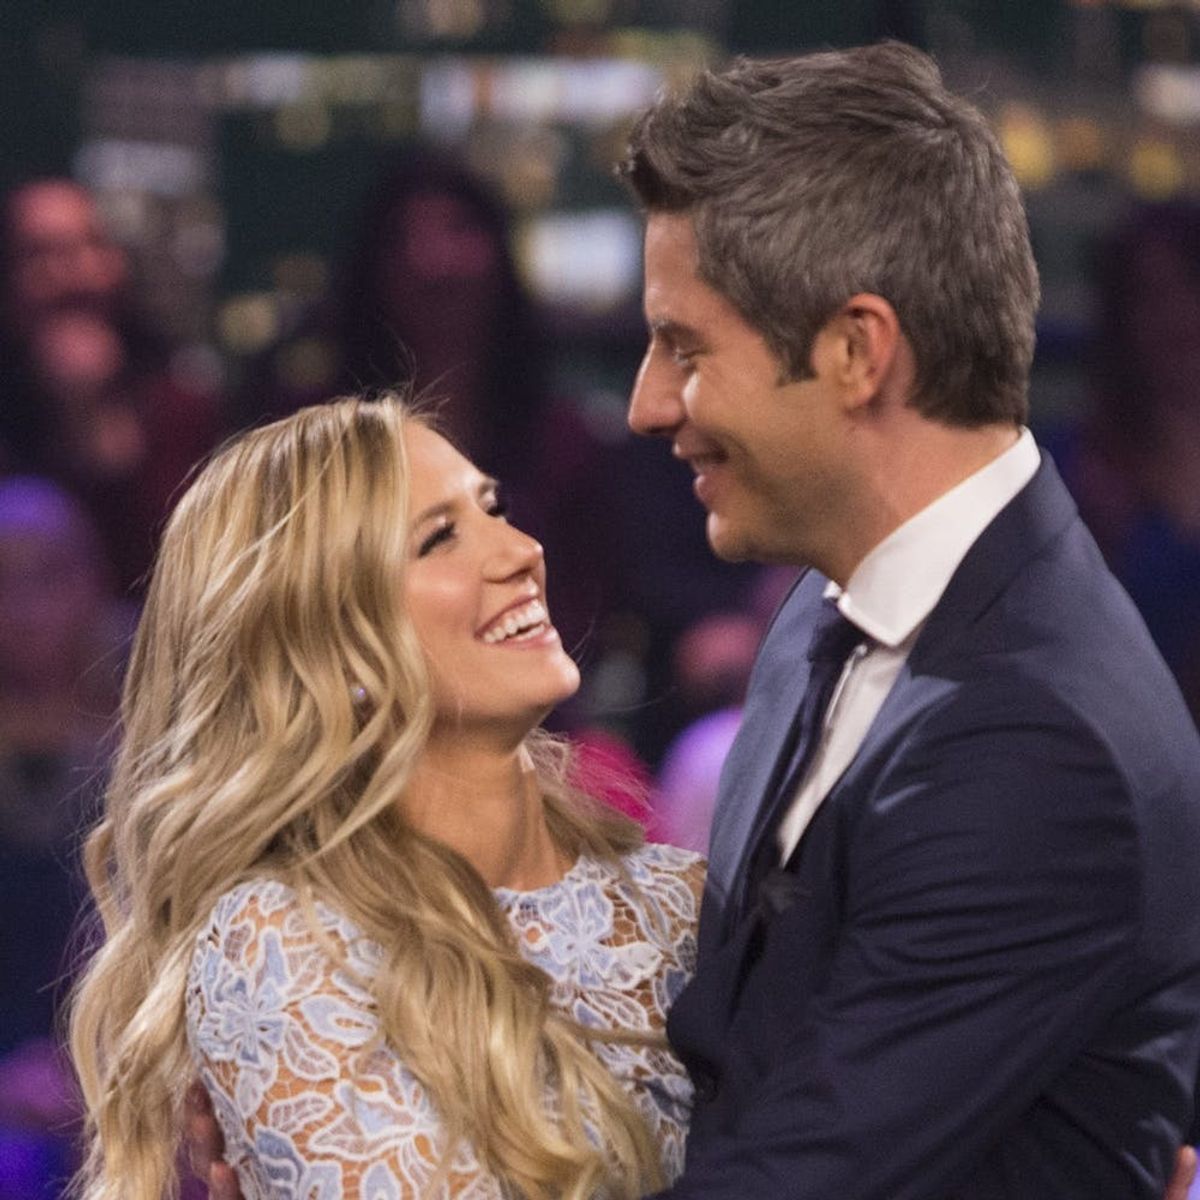 Here’s Your First Glimpse at Lauren Burnham’s Jaw-Dropping Engagement Ring